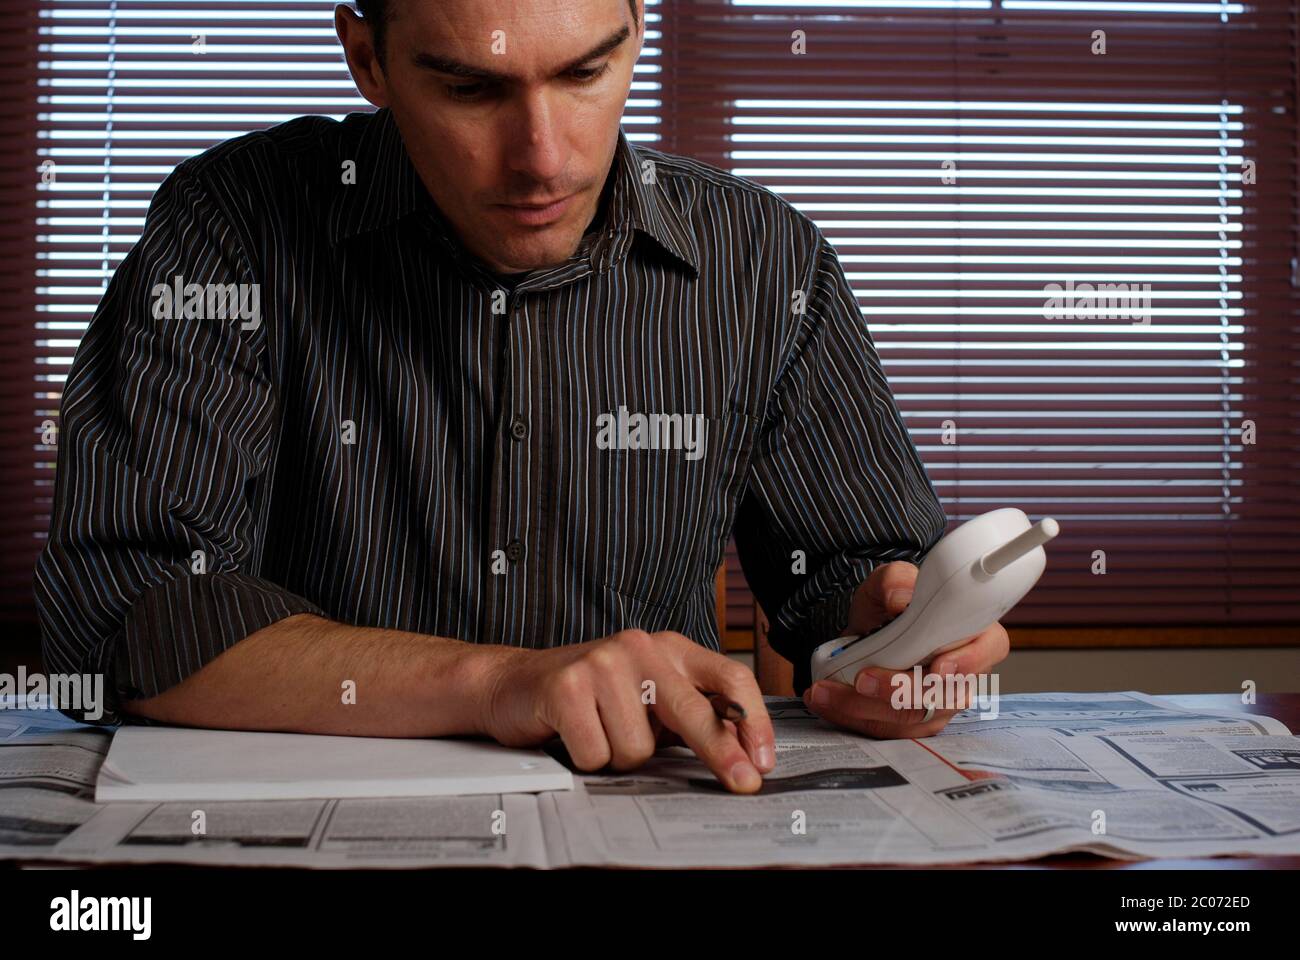 Young man with employment section of newspaper. Stock Photo